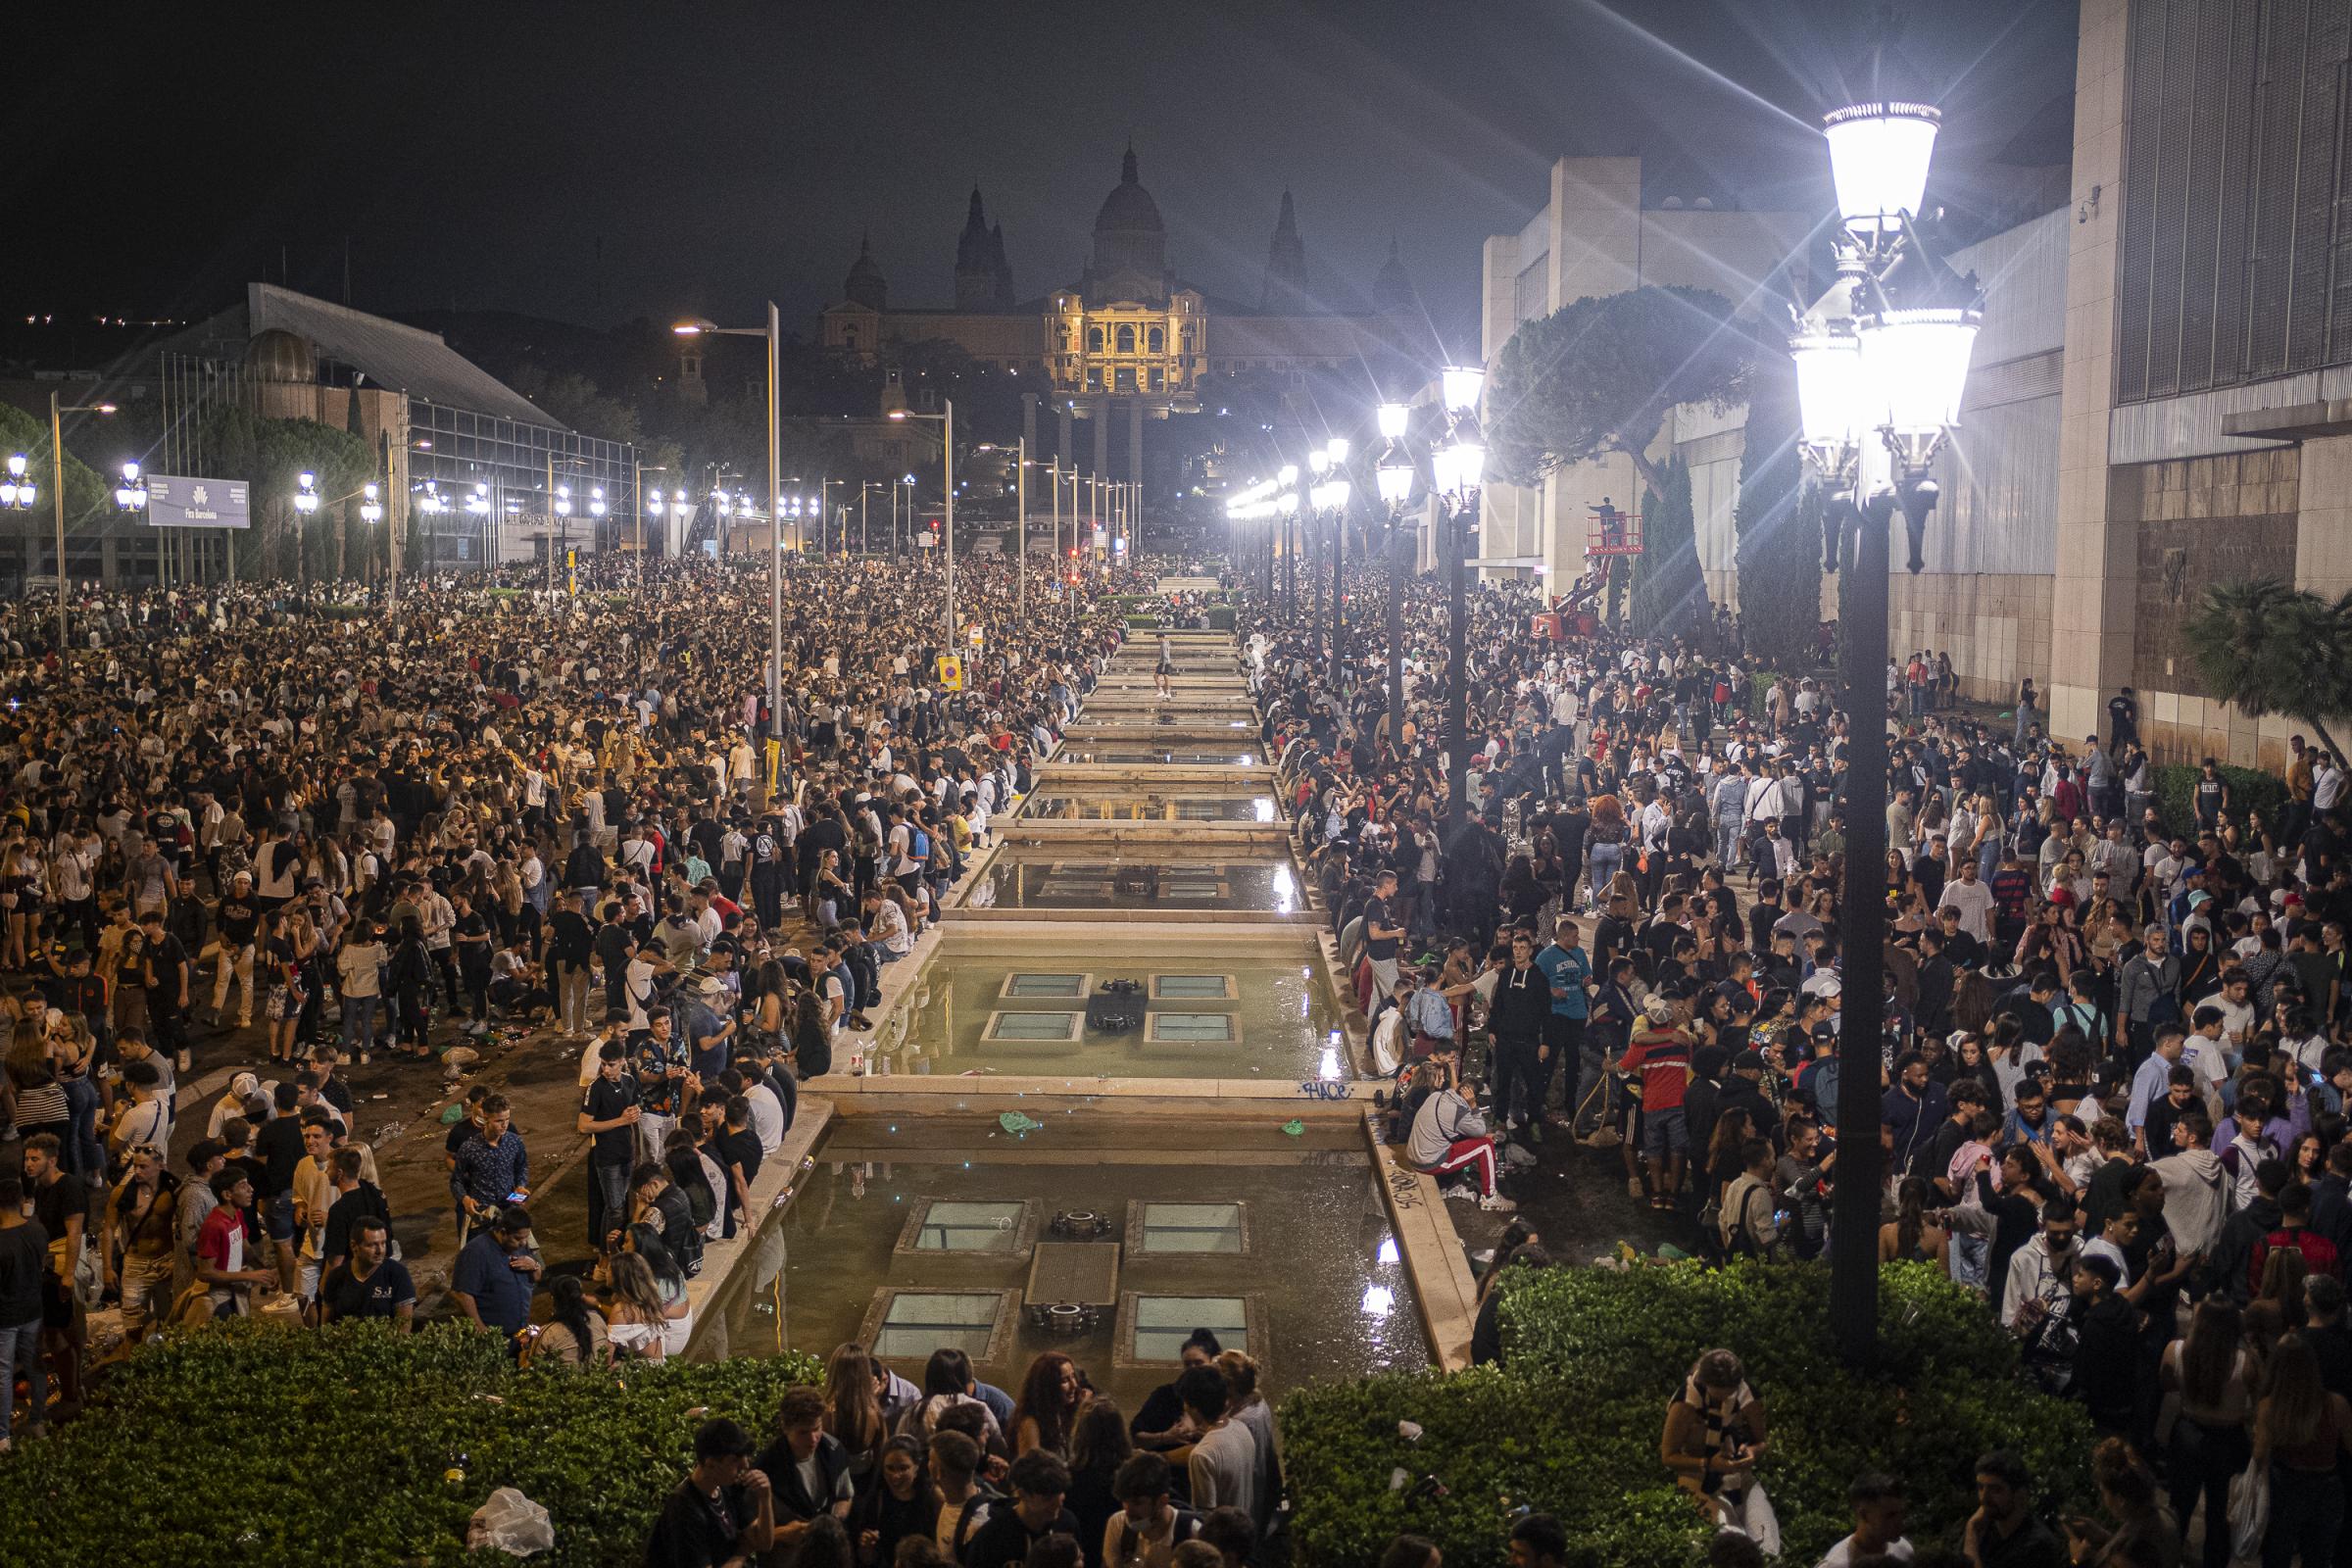 The Mercè's massive boozings: images of the incidents in Barcelona